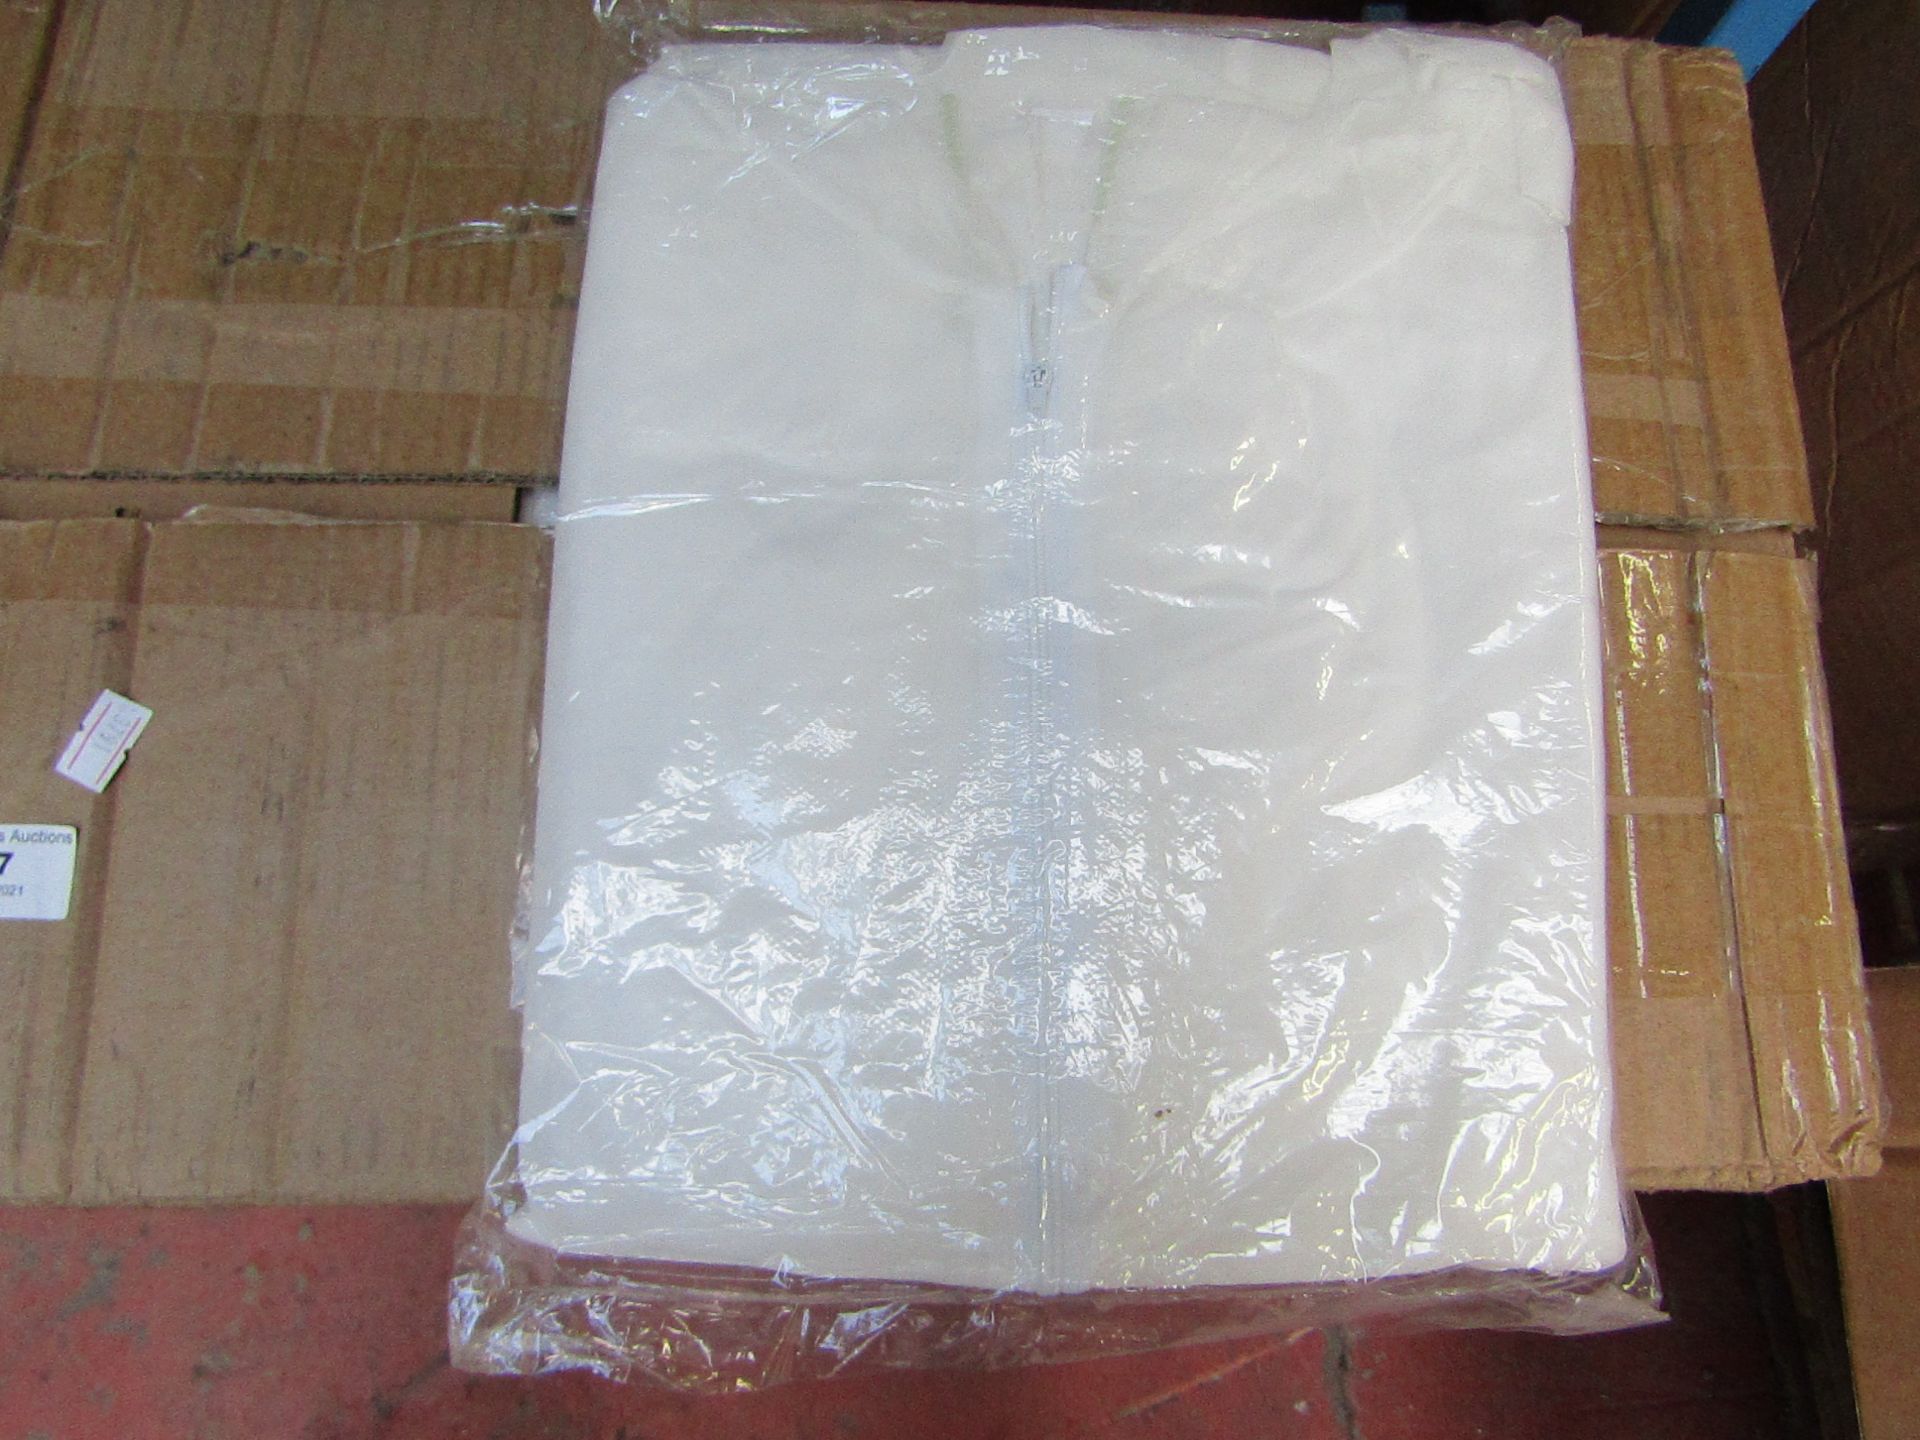 10x Disposable Coverall - White - Size 2XL - New & Packaged.